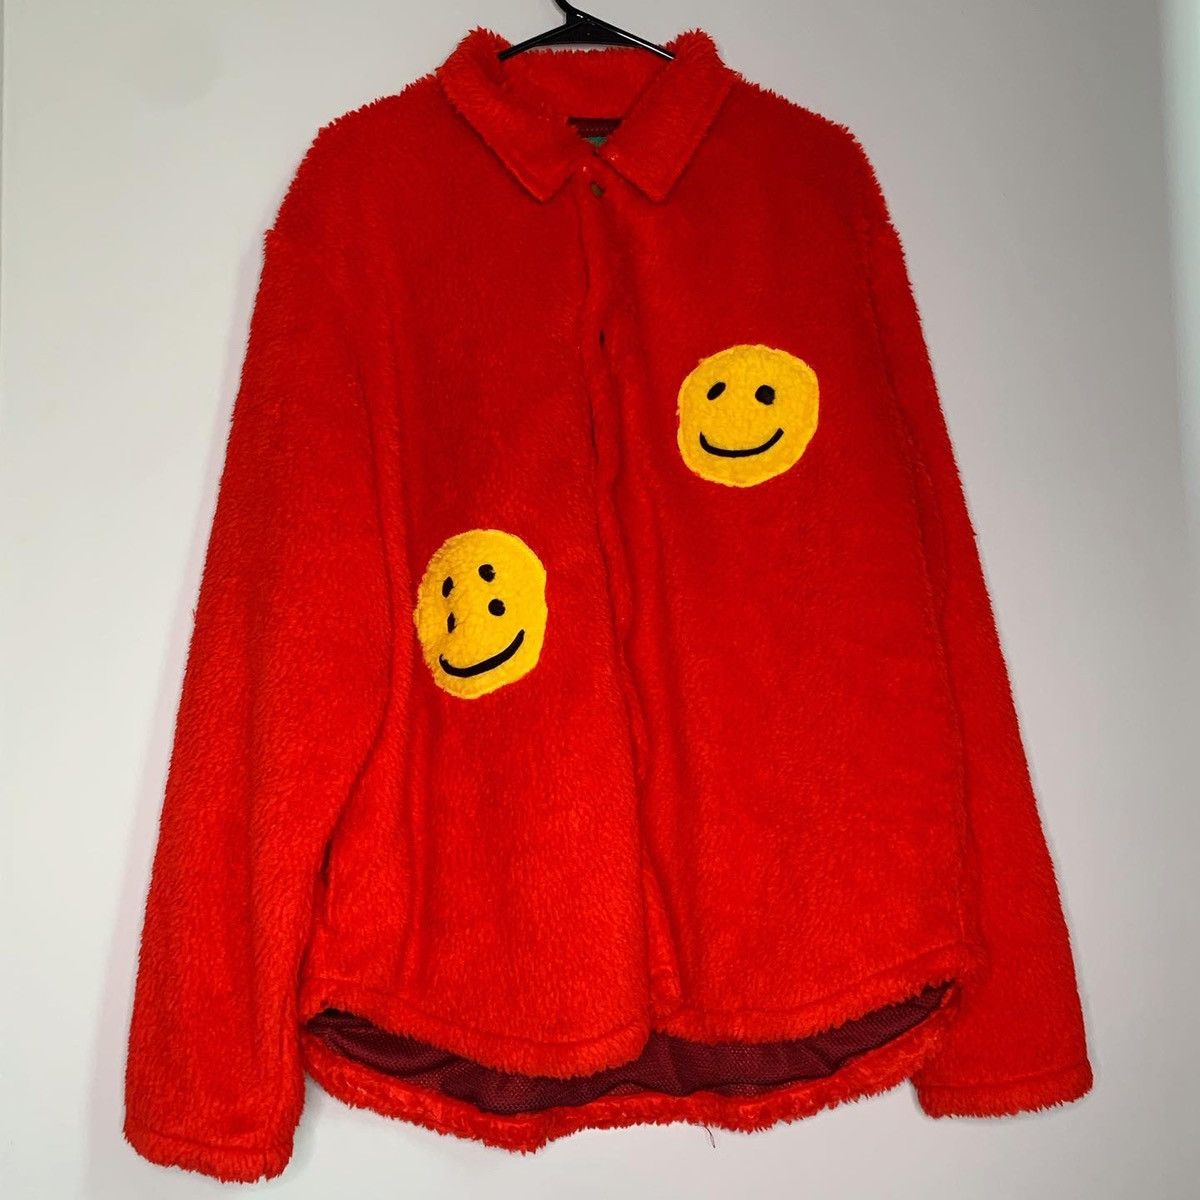 Human Made CPFM x Human Made Red Double Smiley Work Shirt 4 XL | Grailed